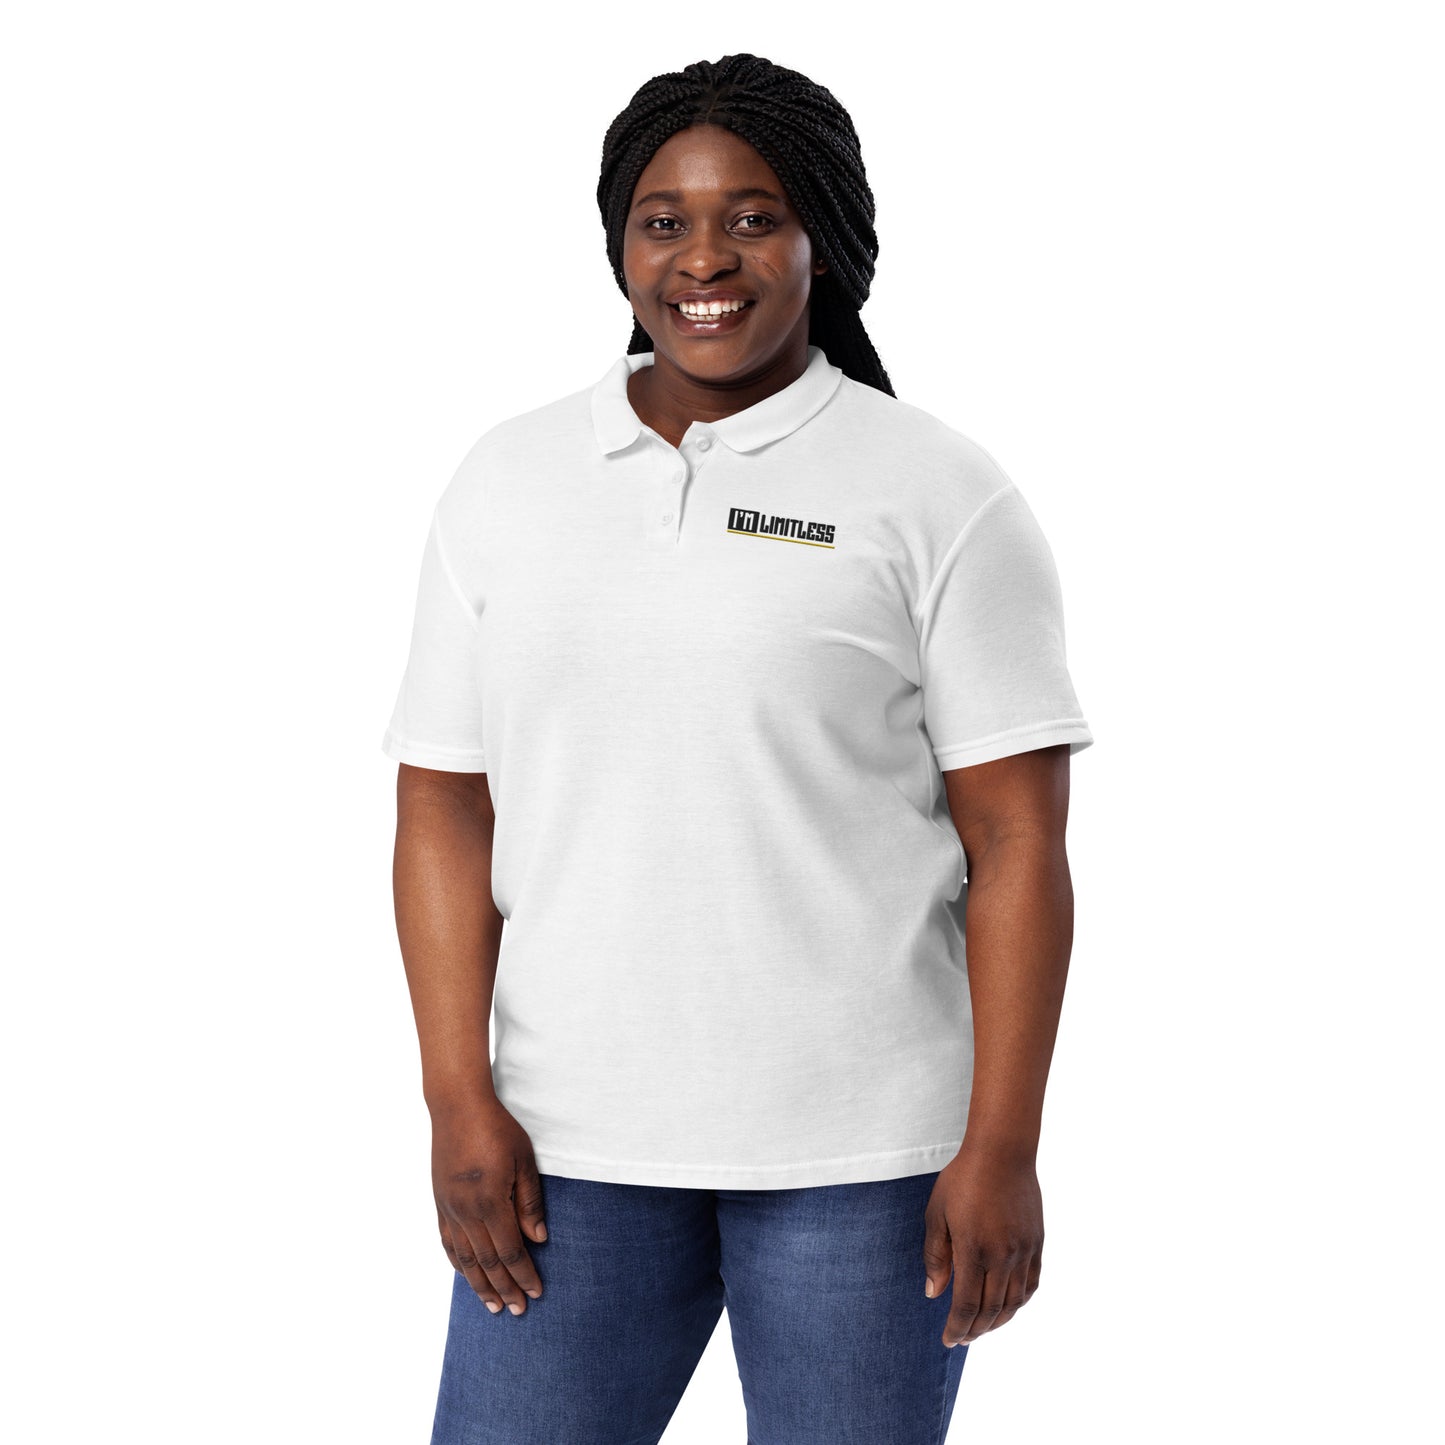 Limitless Woman's Pique Polo Shirt - Breathable & Durable | Your Fashion Statement